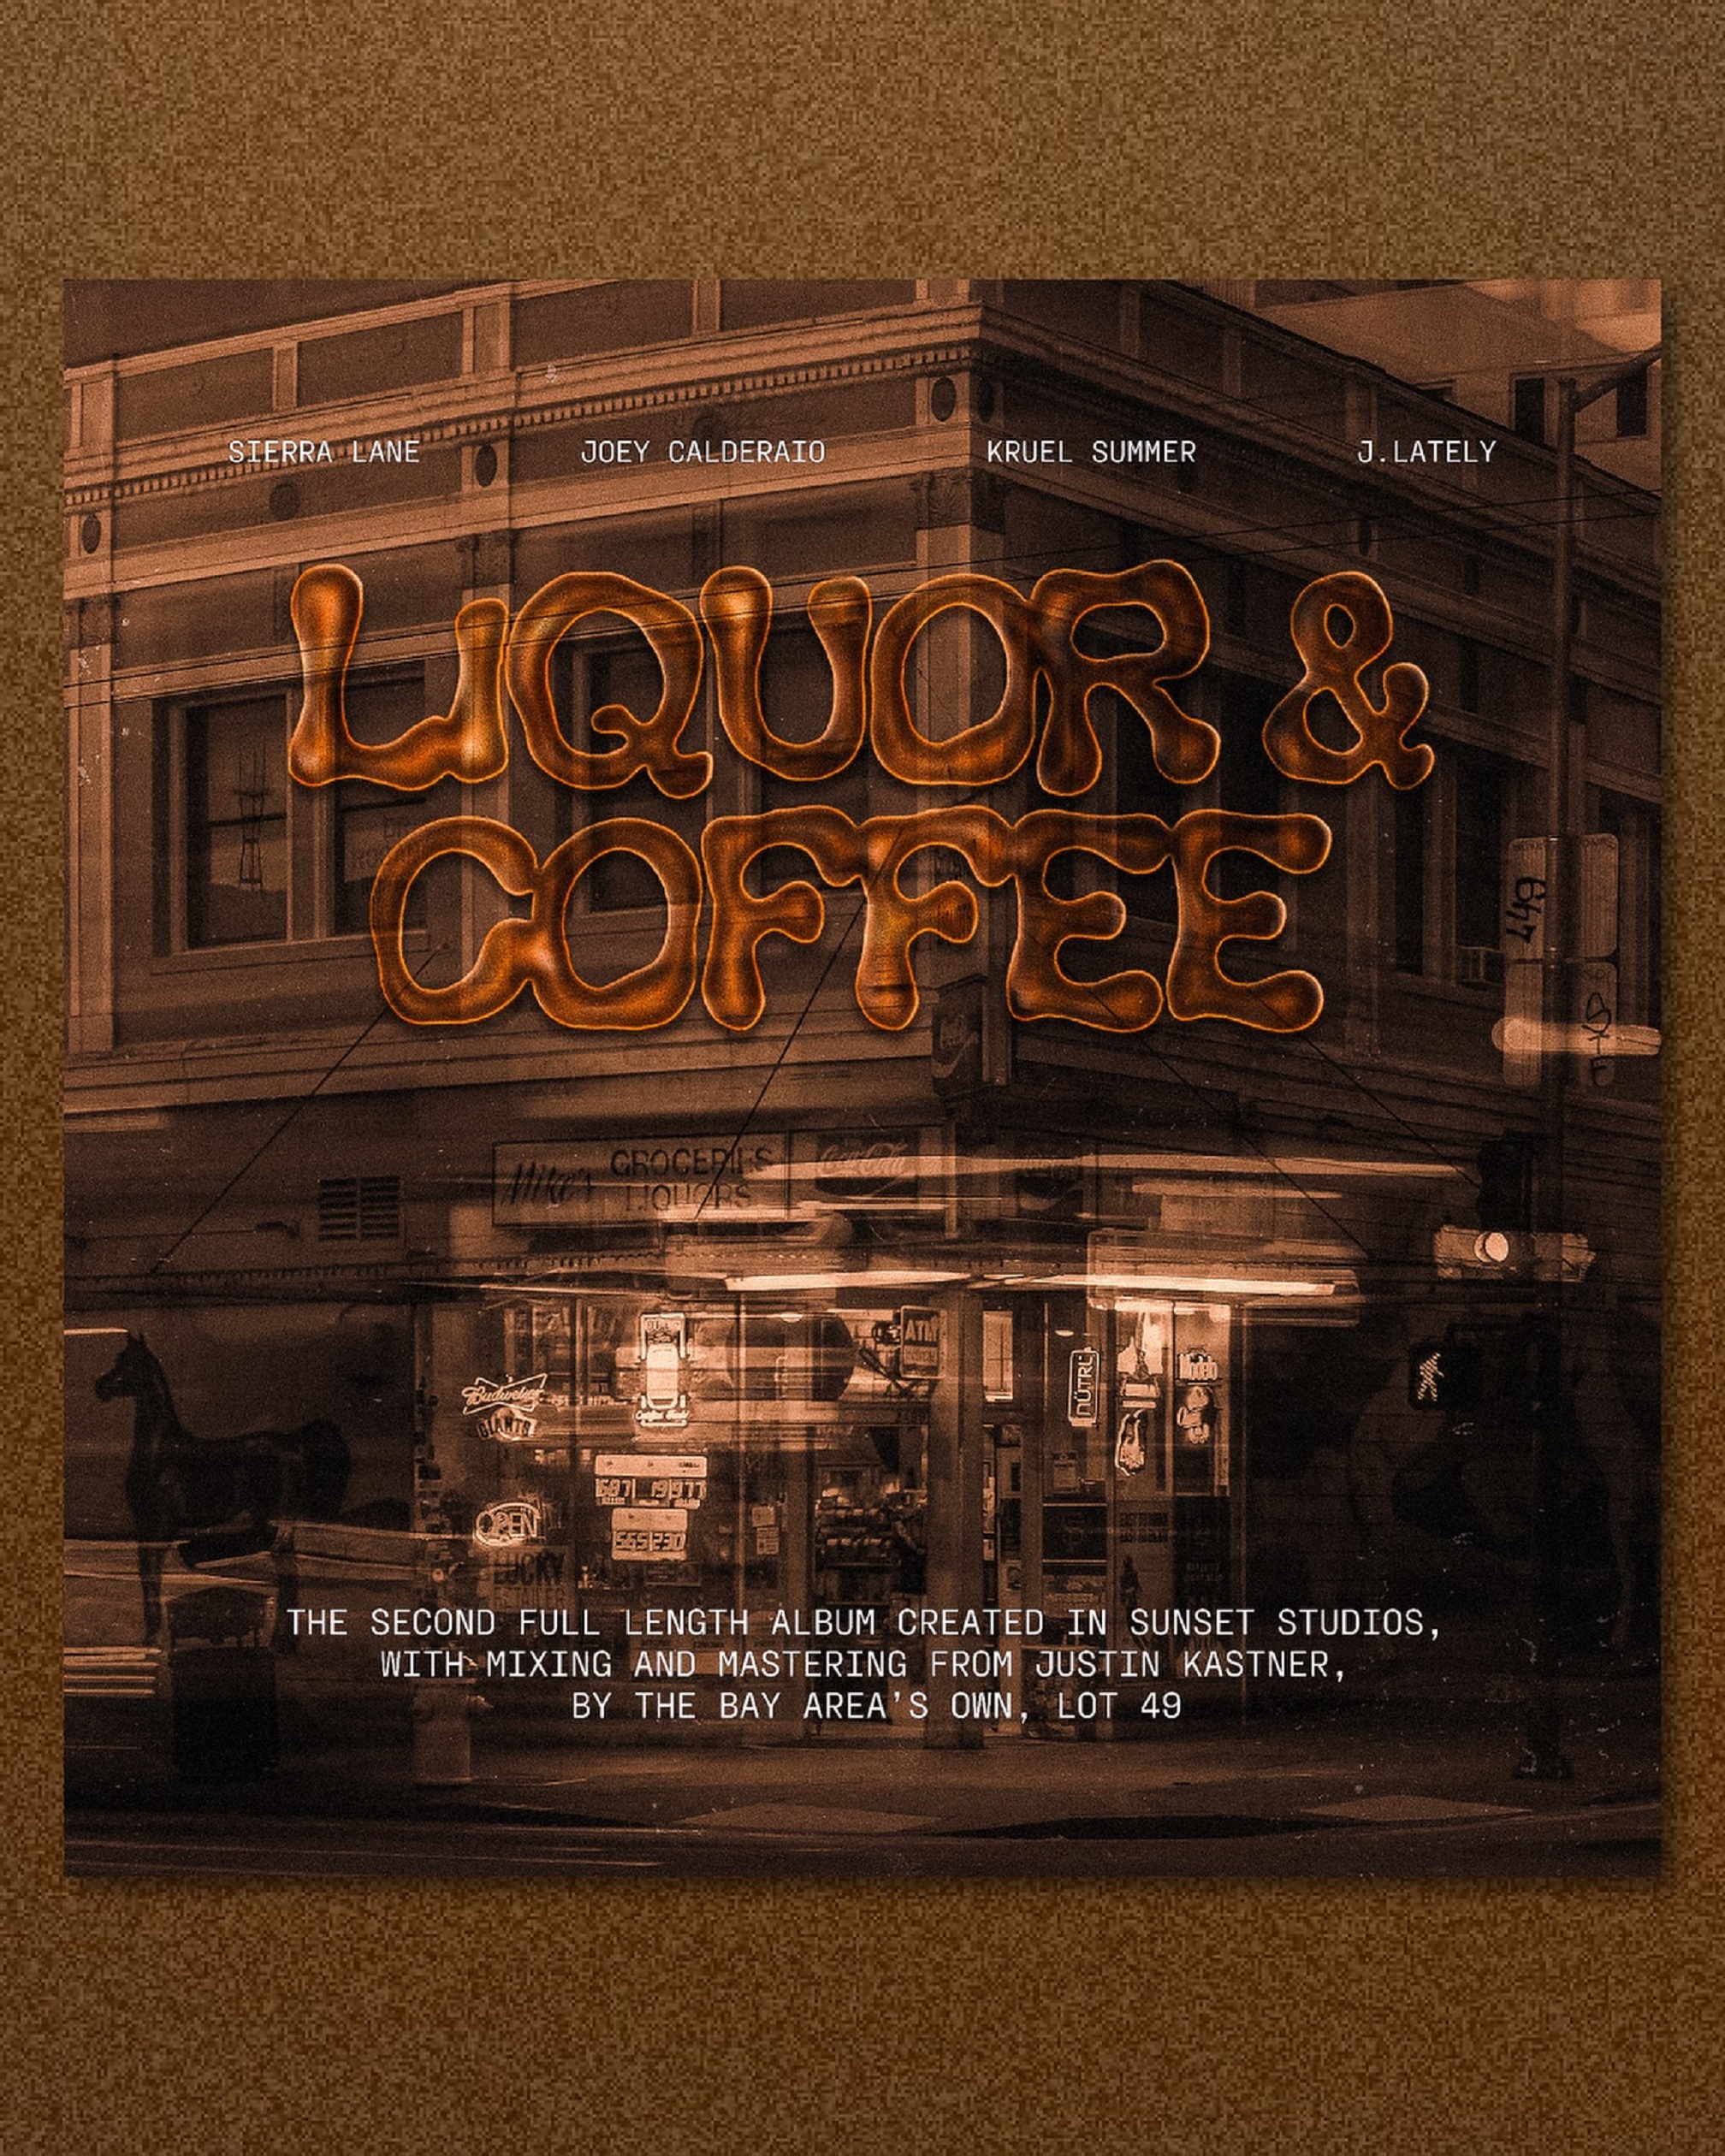 Lot 49 Set to Release Highly Anticipated Second Album "Liquor & Coffee" on July 19th